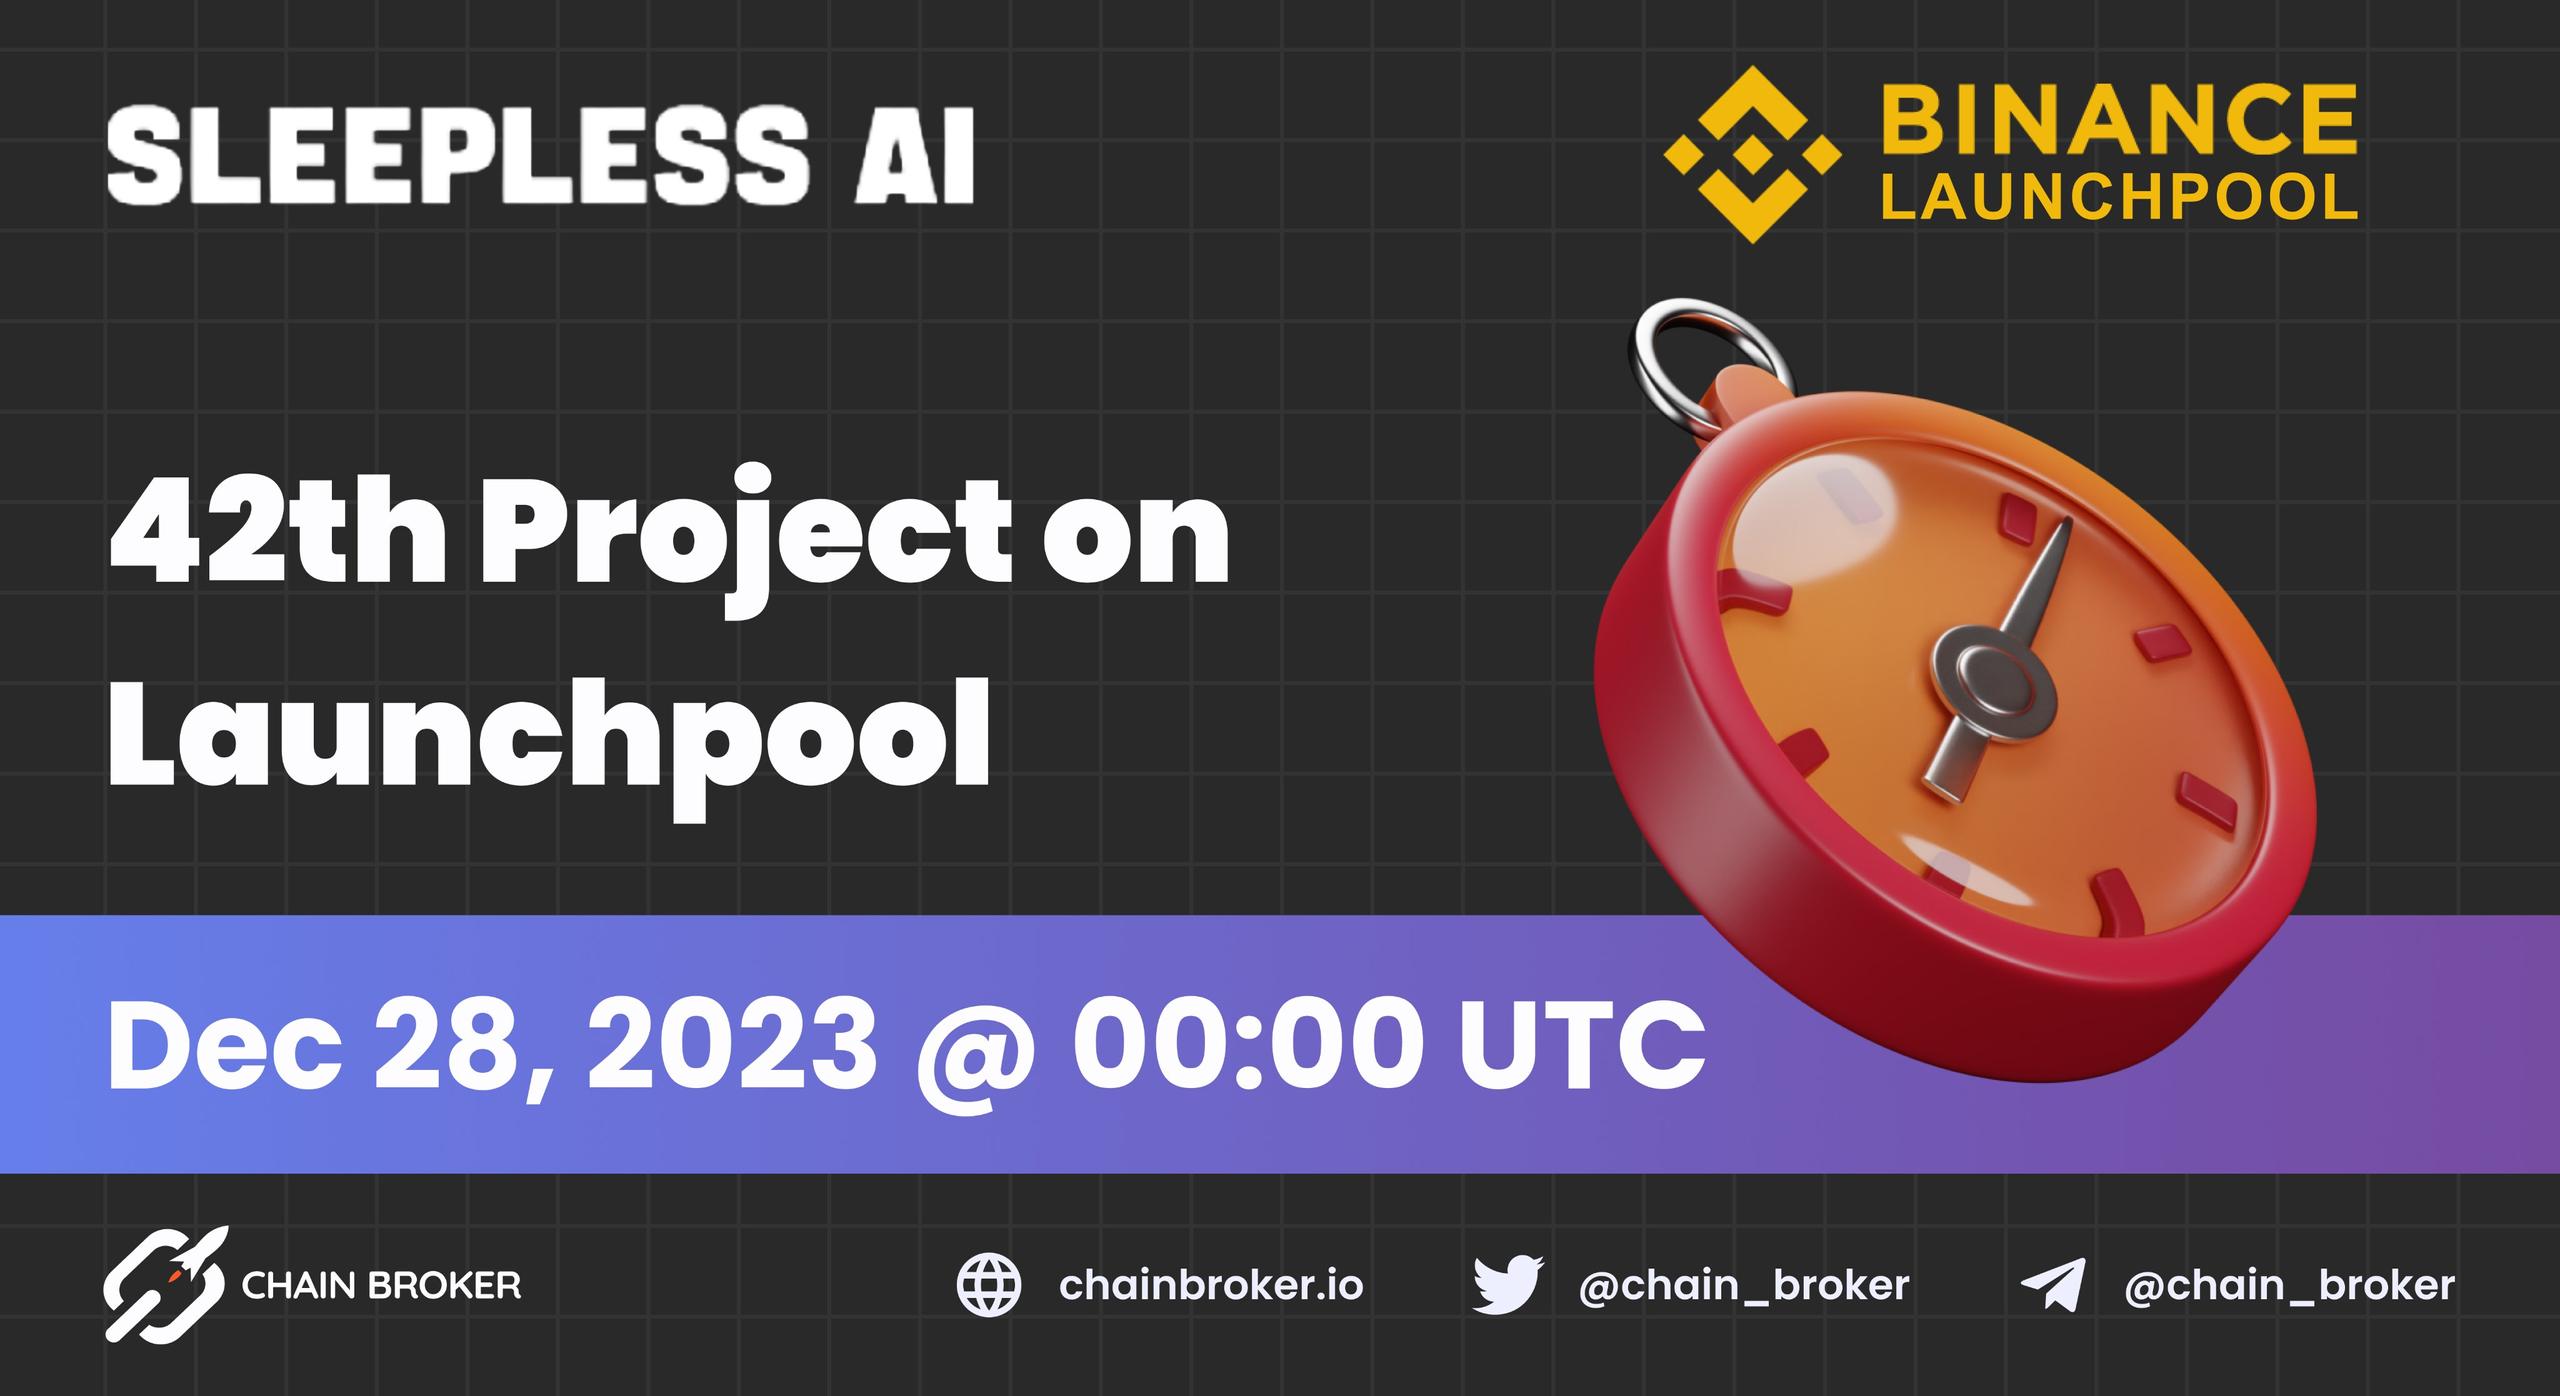 Binance Launchpool Announces its 42th Project